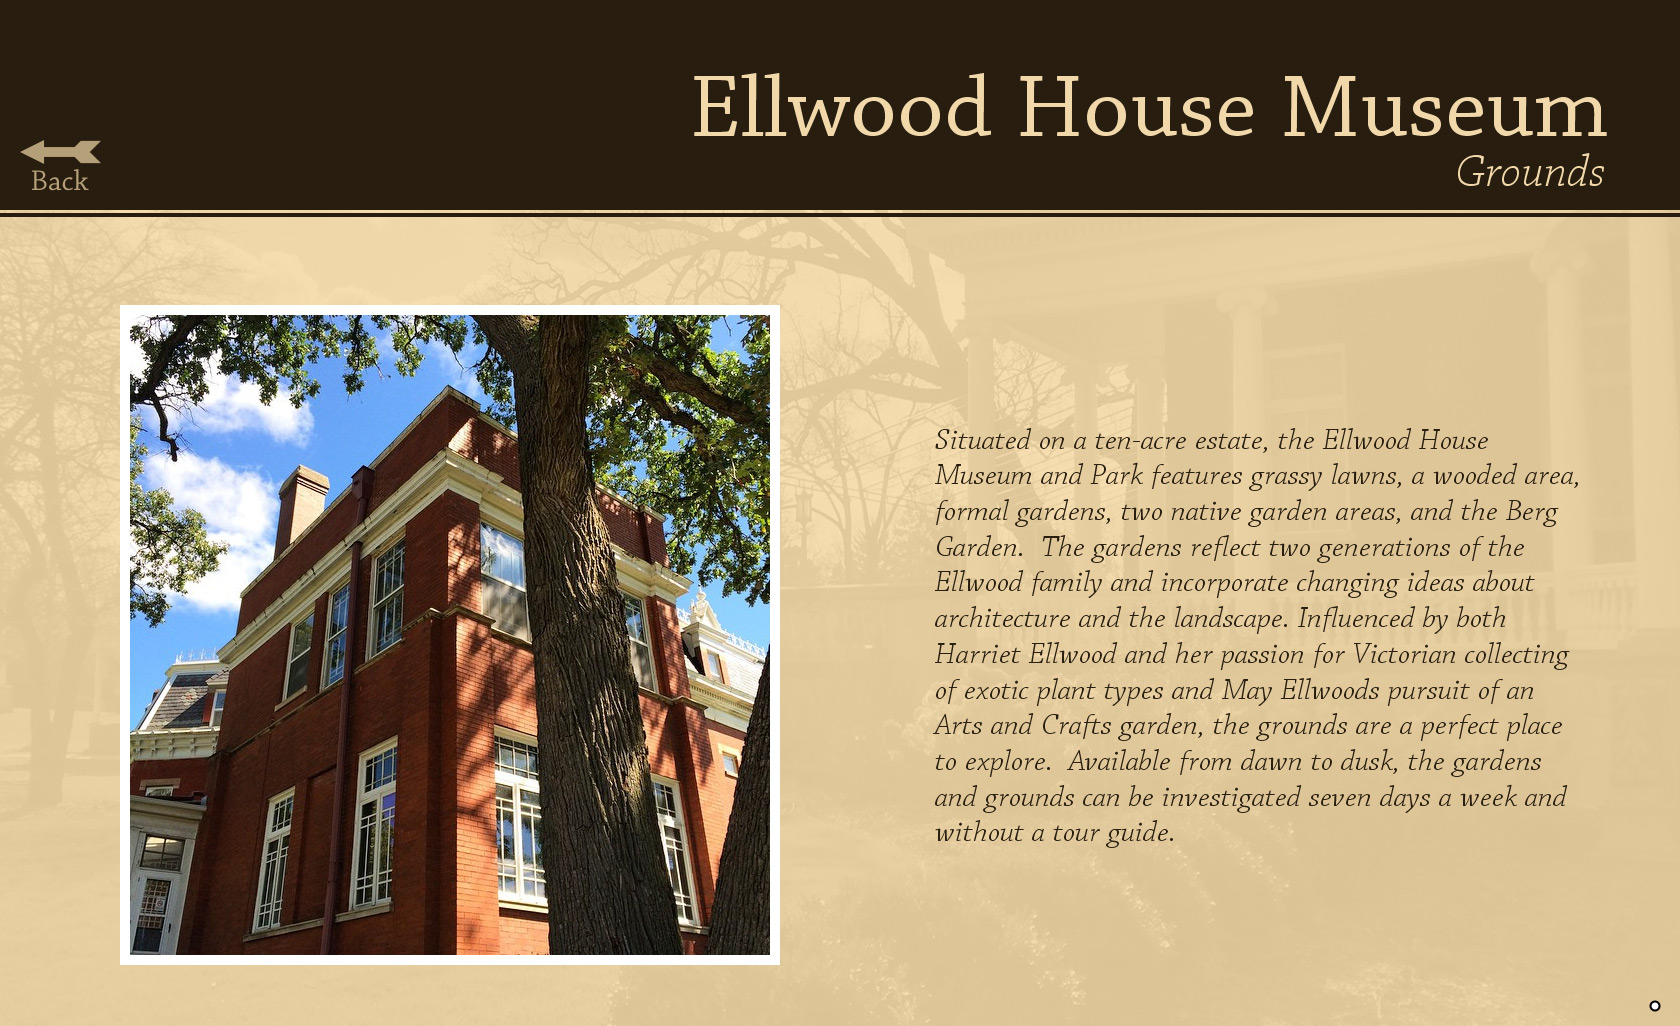 Ellwood House Museum: Grounds